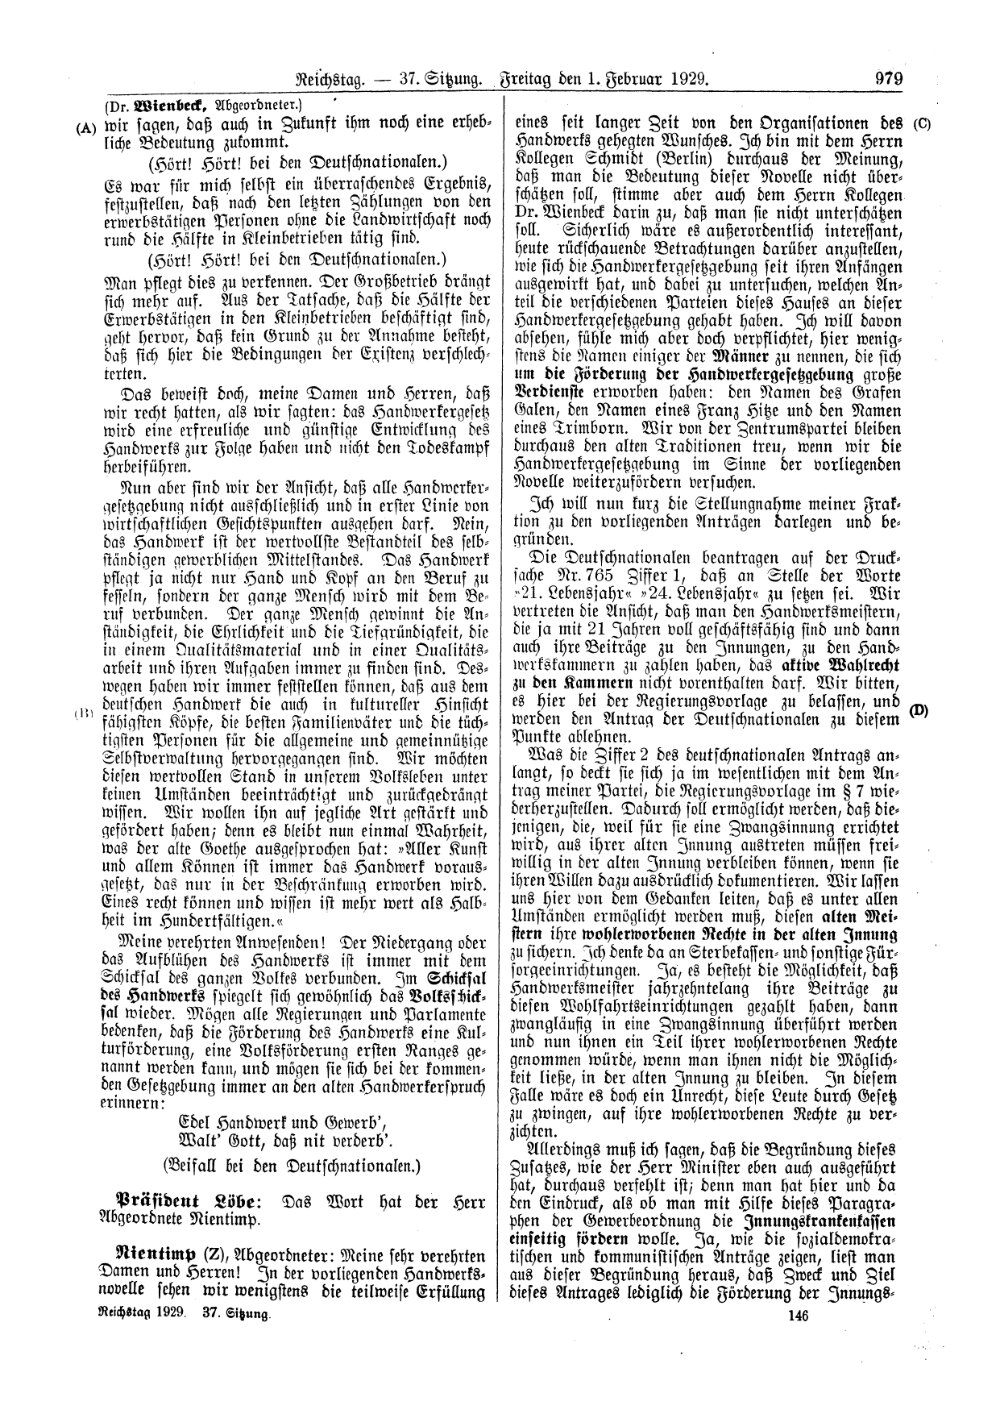 Scan of page 979